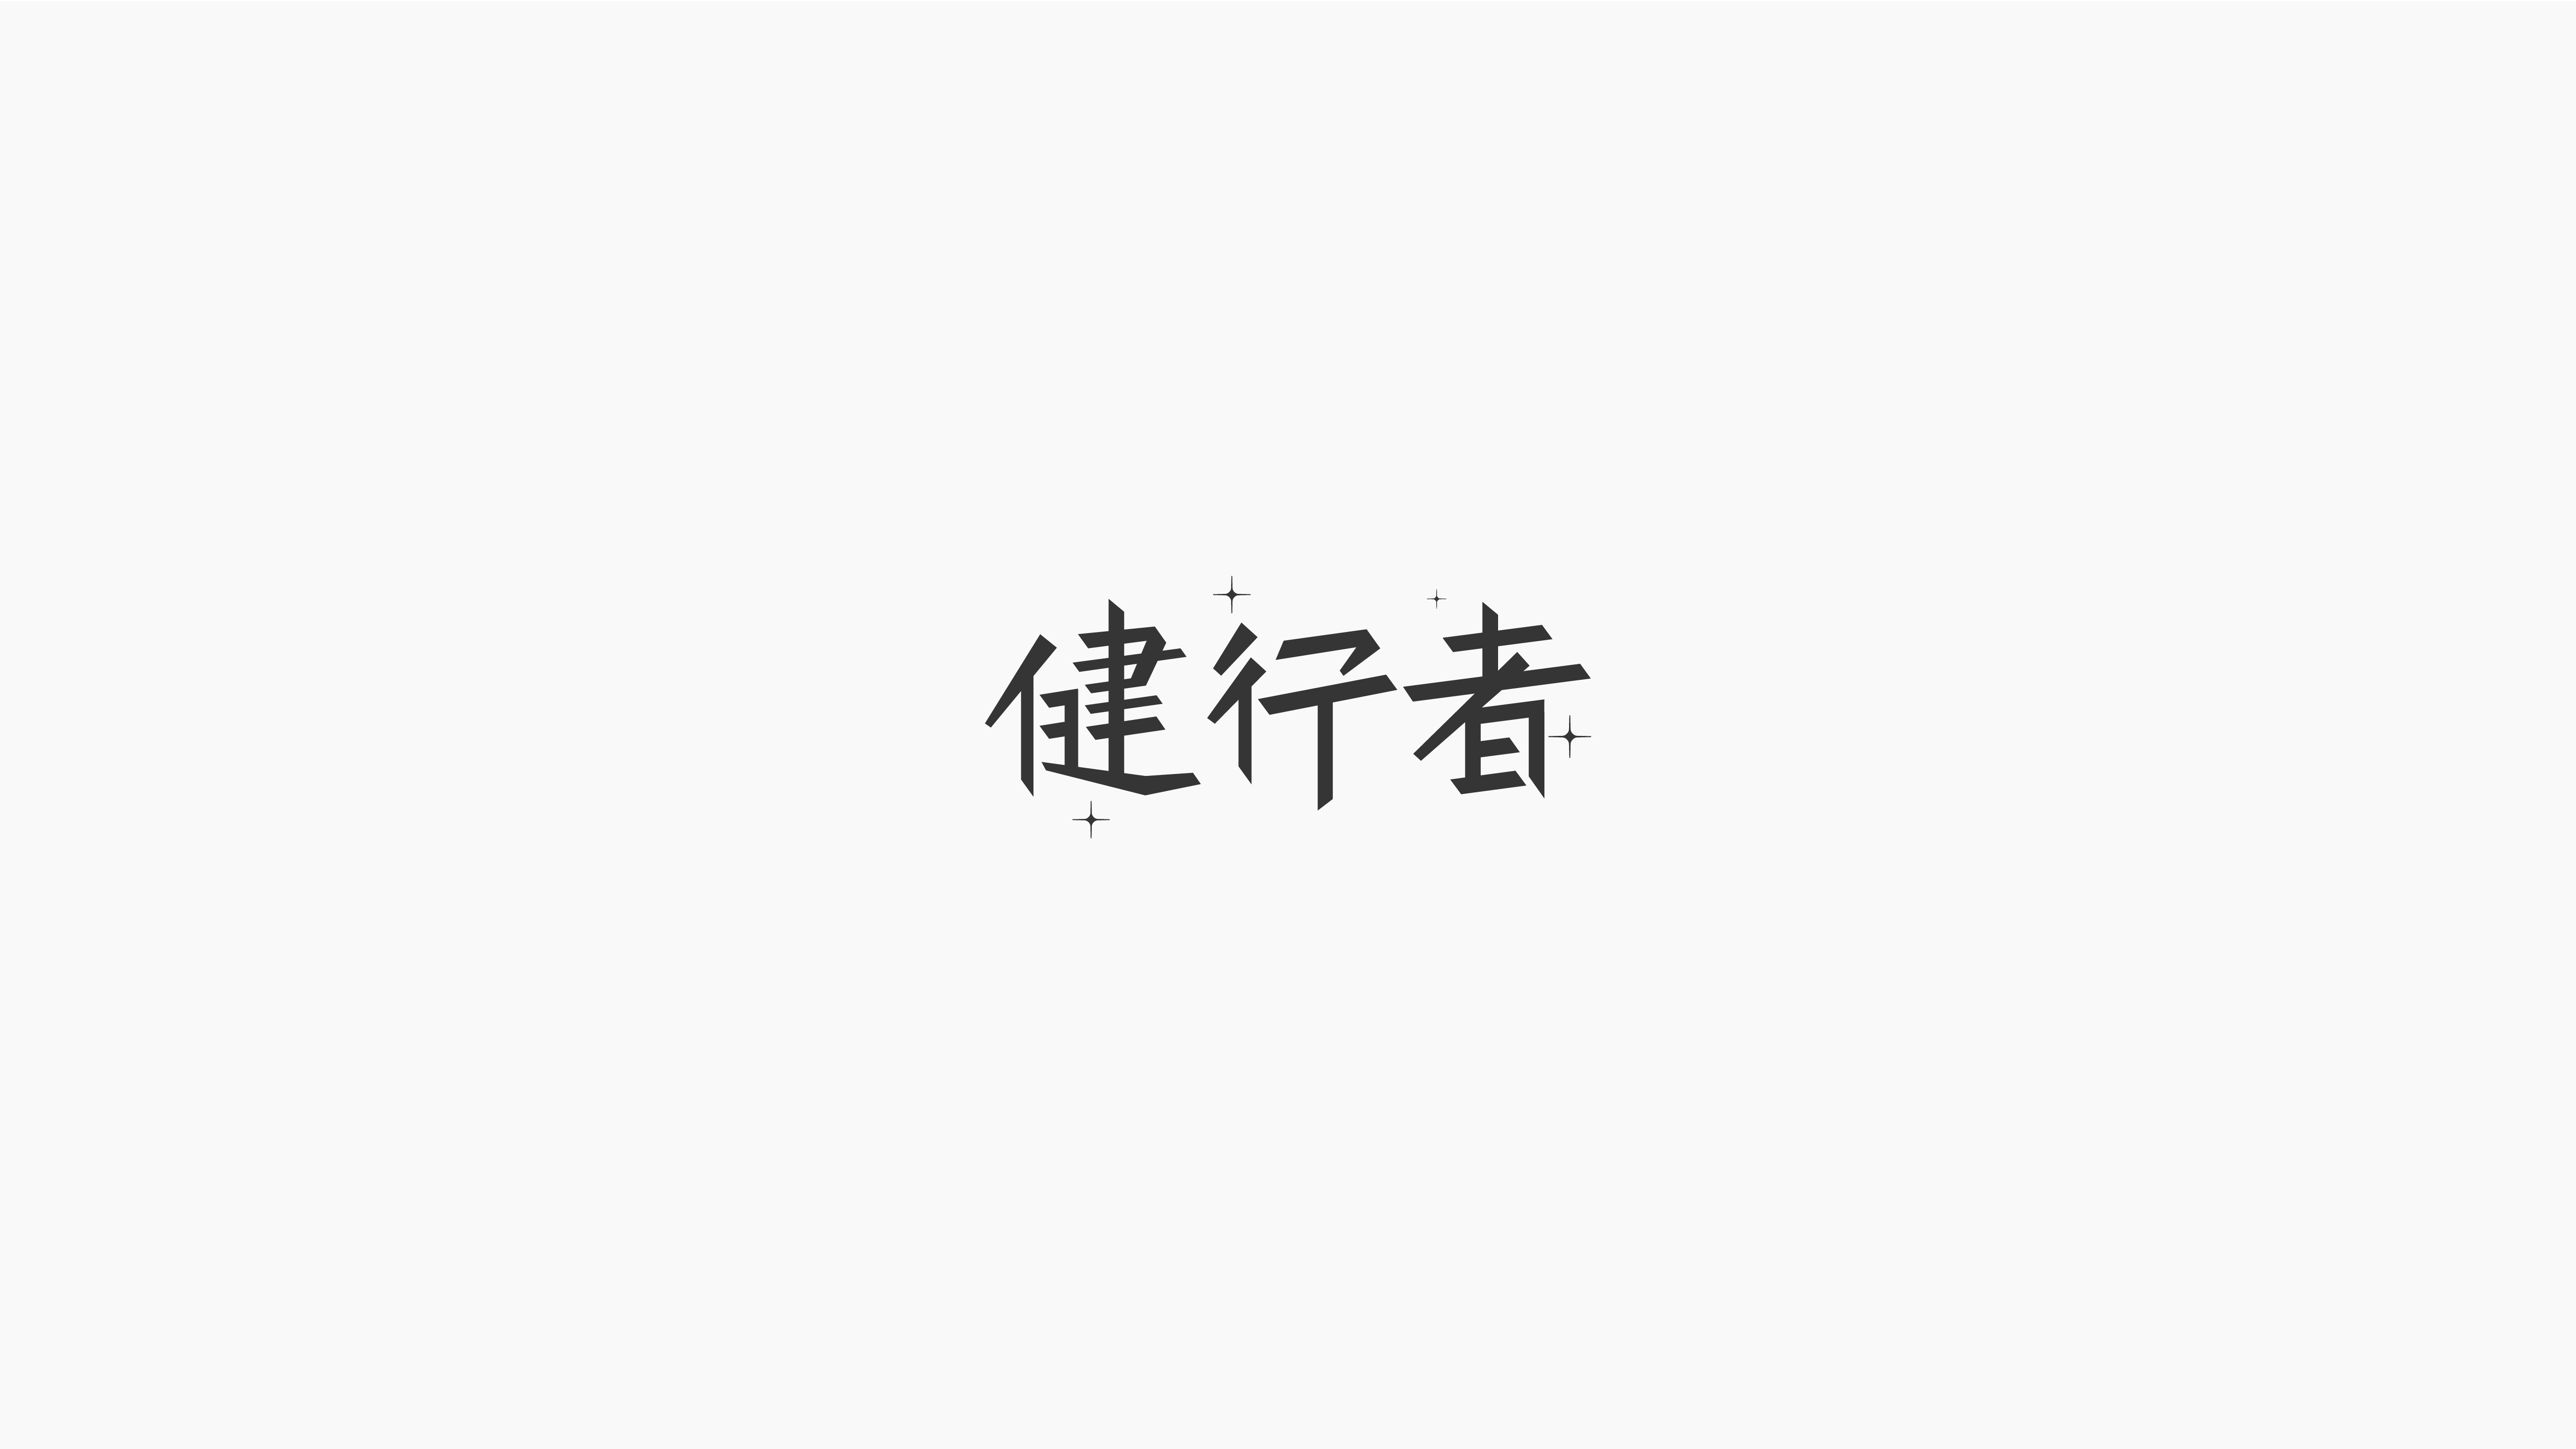 18P Chinese font design collection inspiration #.270